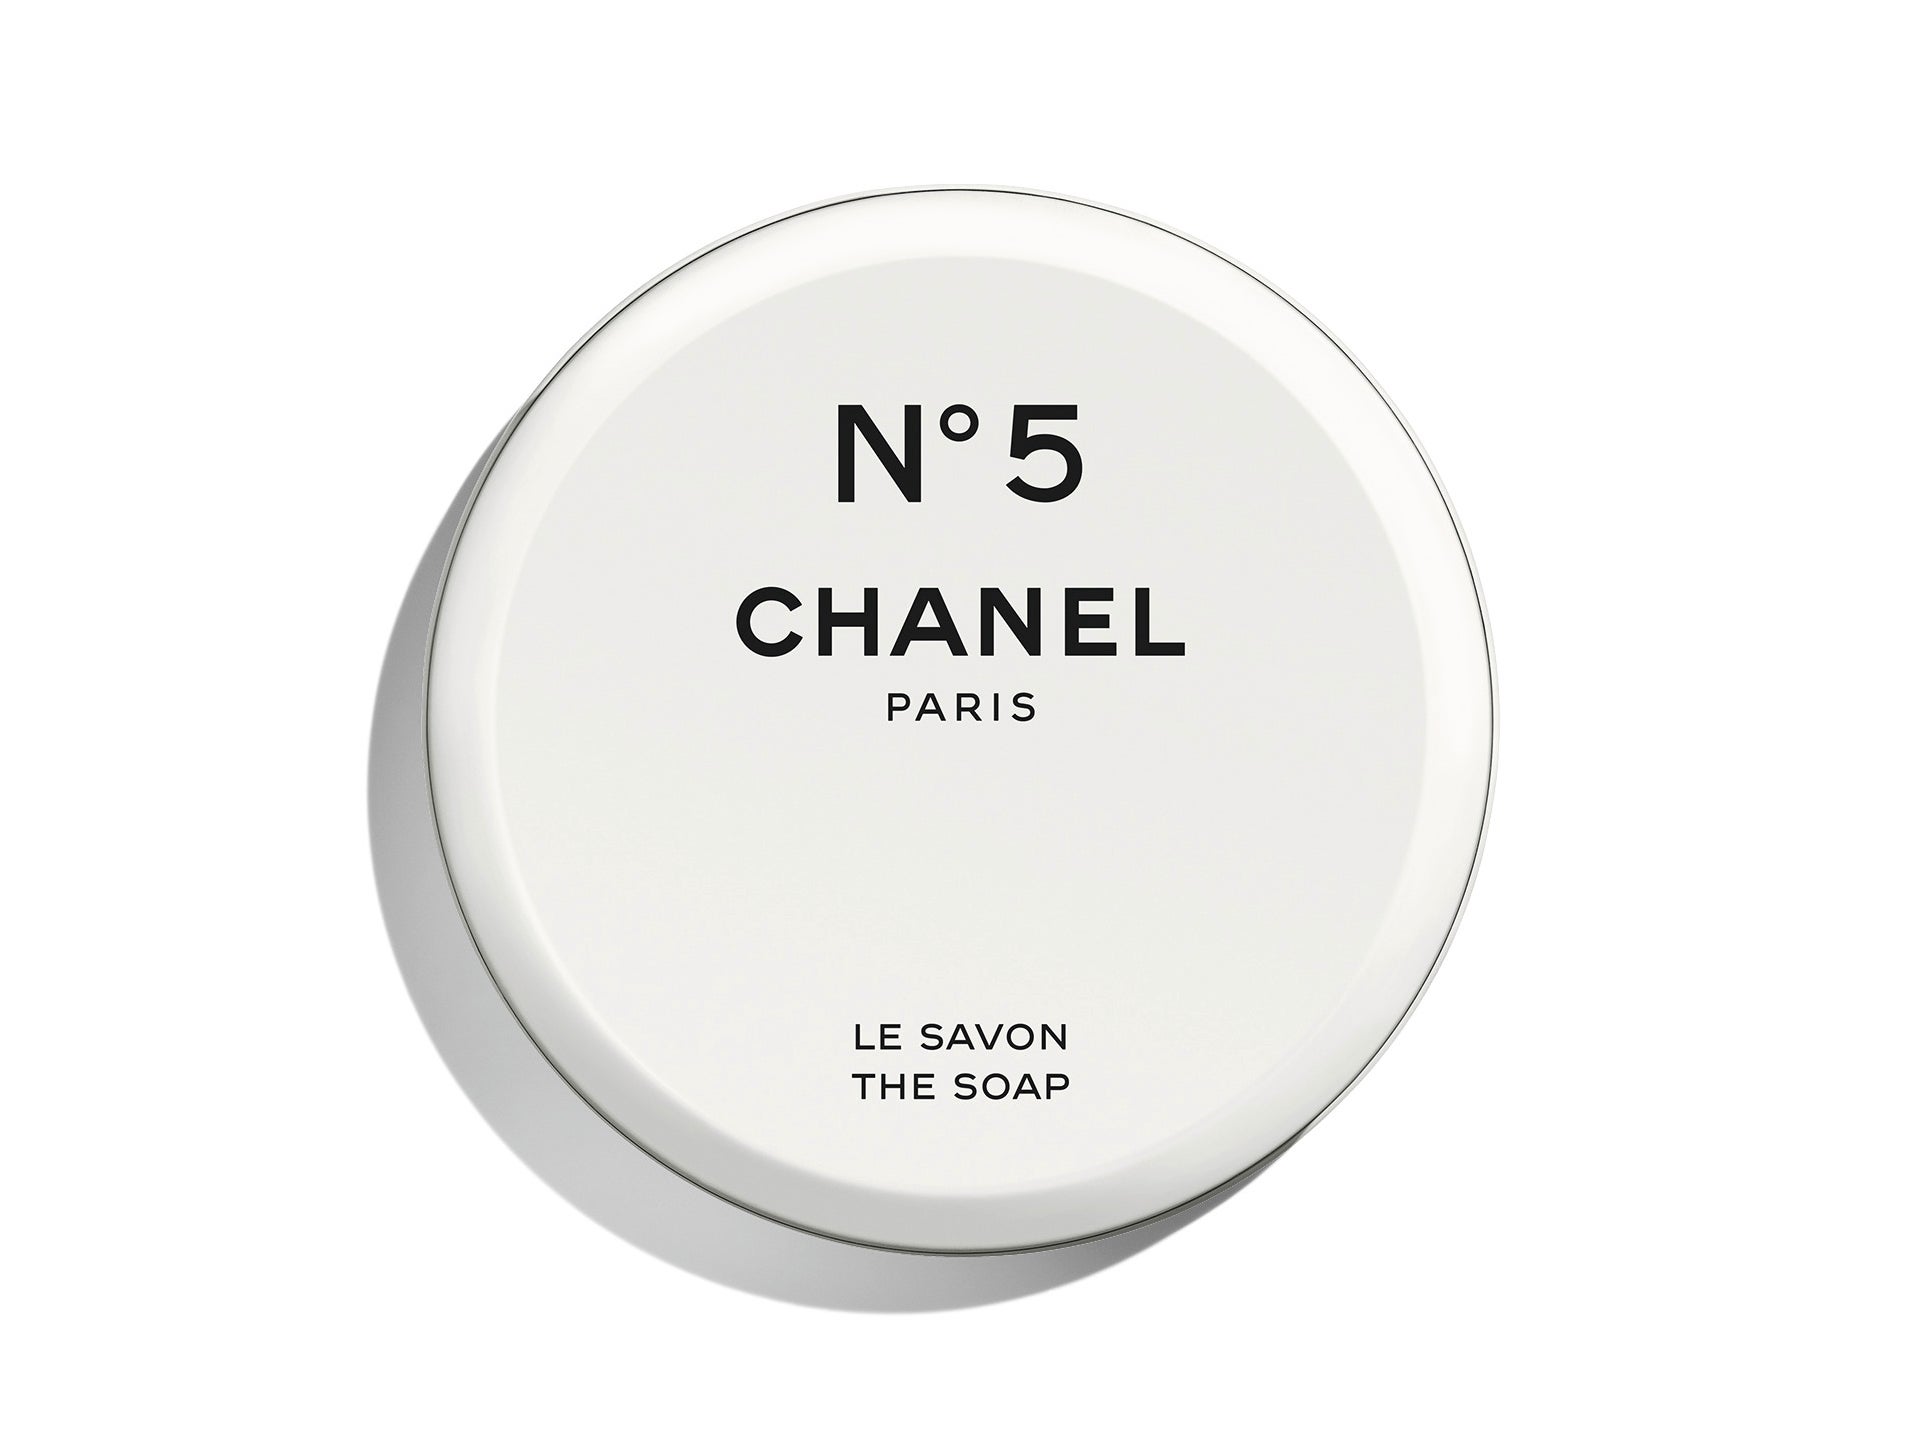 Chanel No.5 perfume: The 100th anniversary collection review